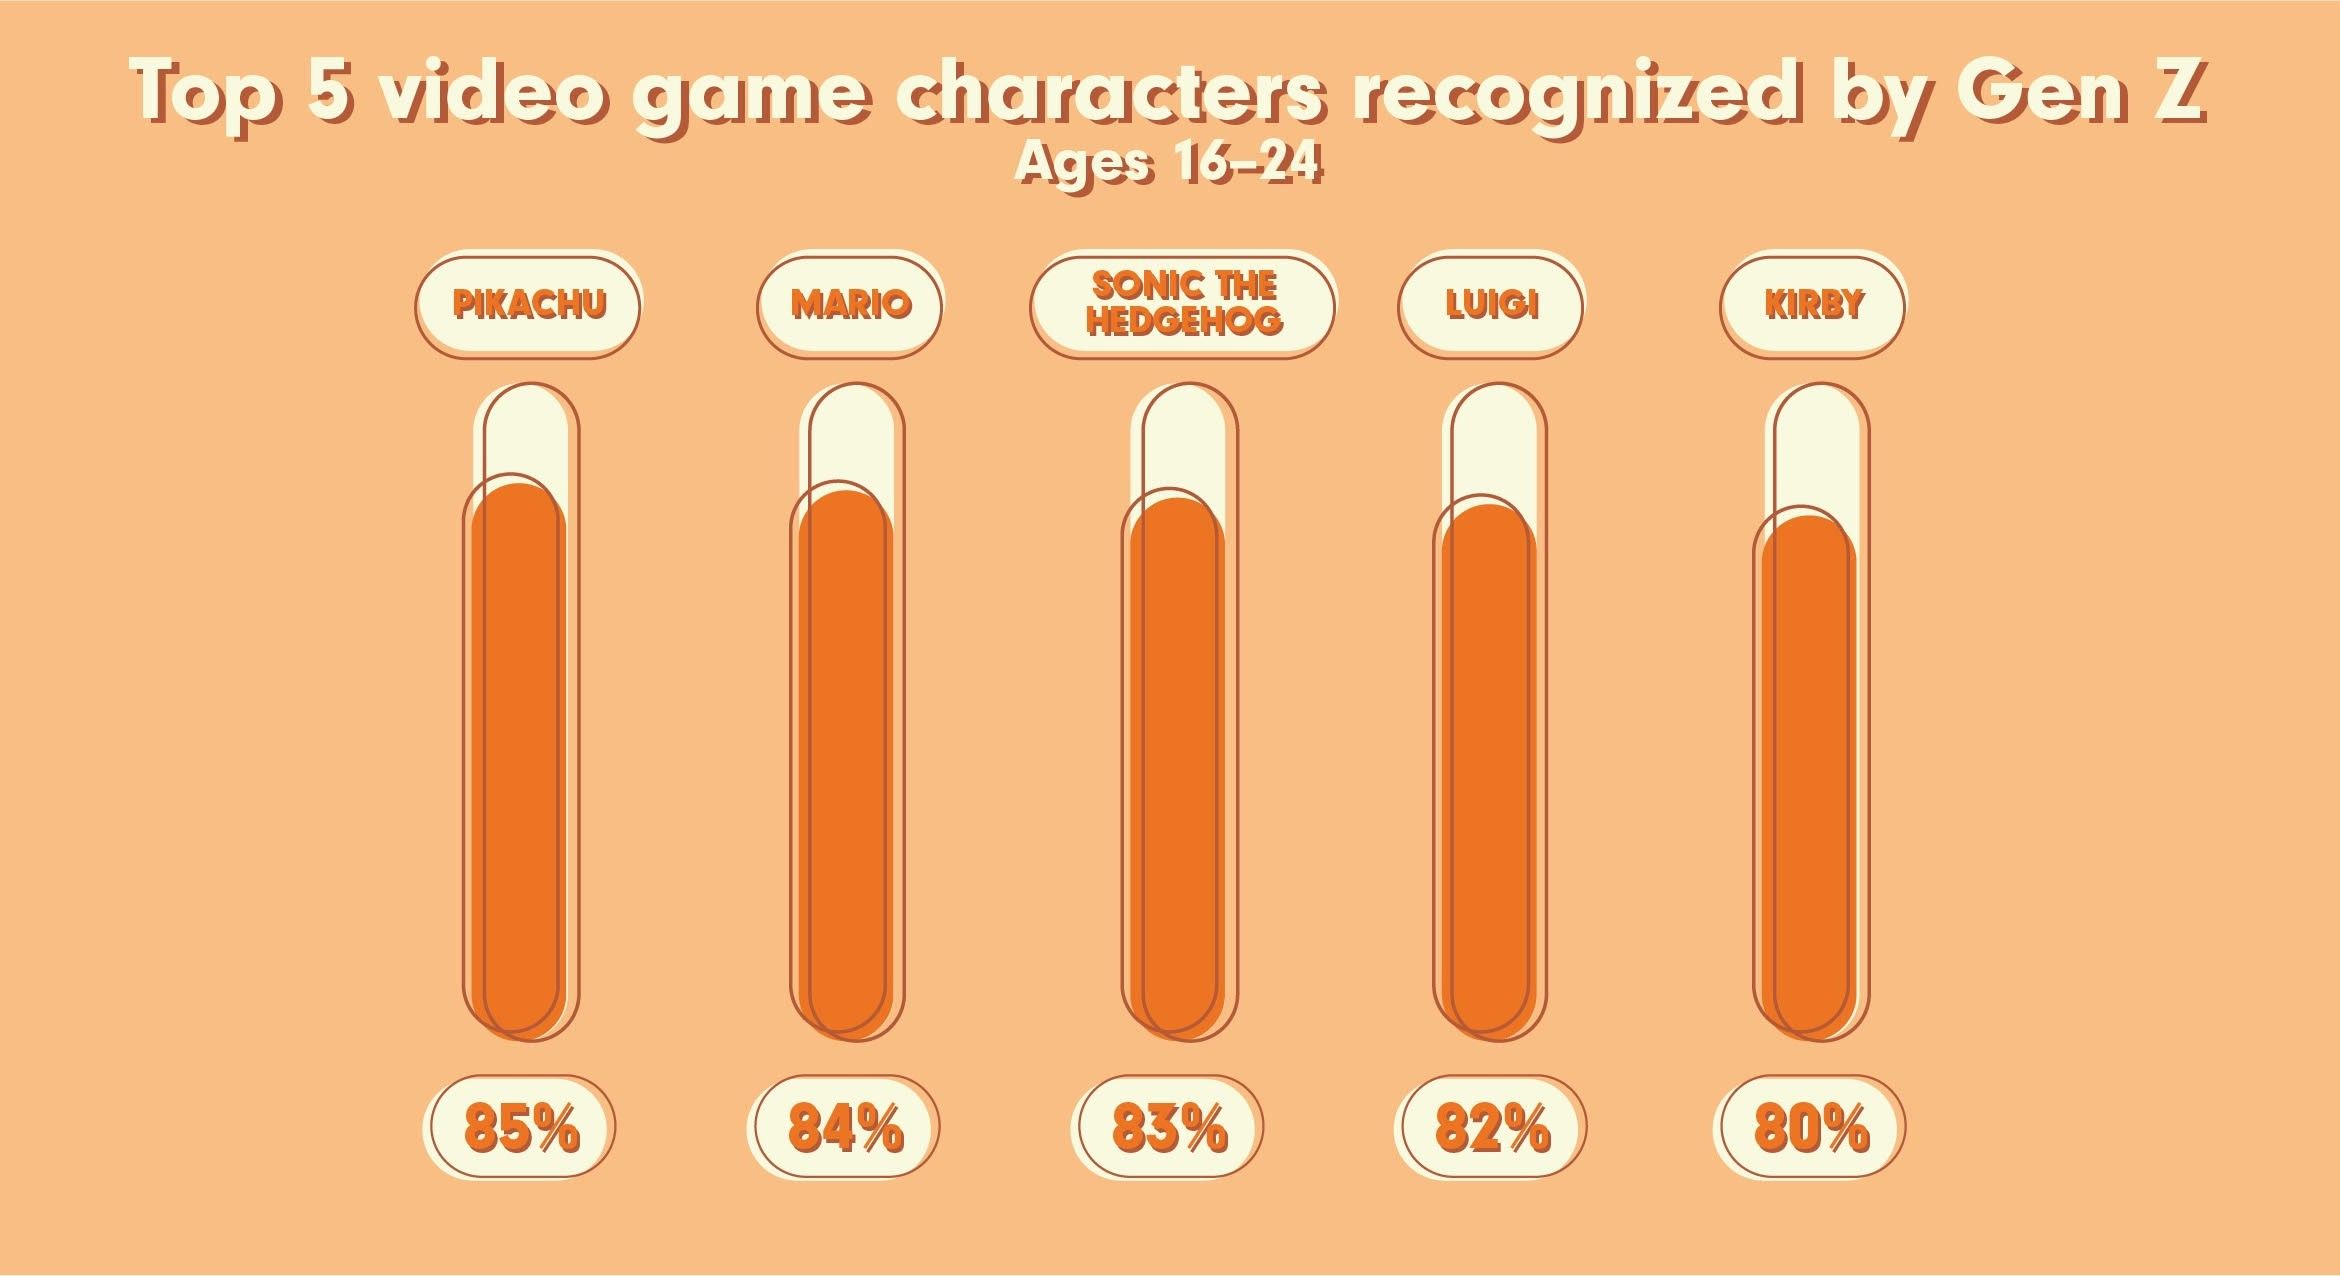 Video game characters recognized by Gen Z